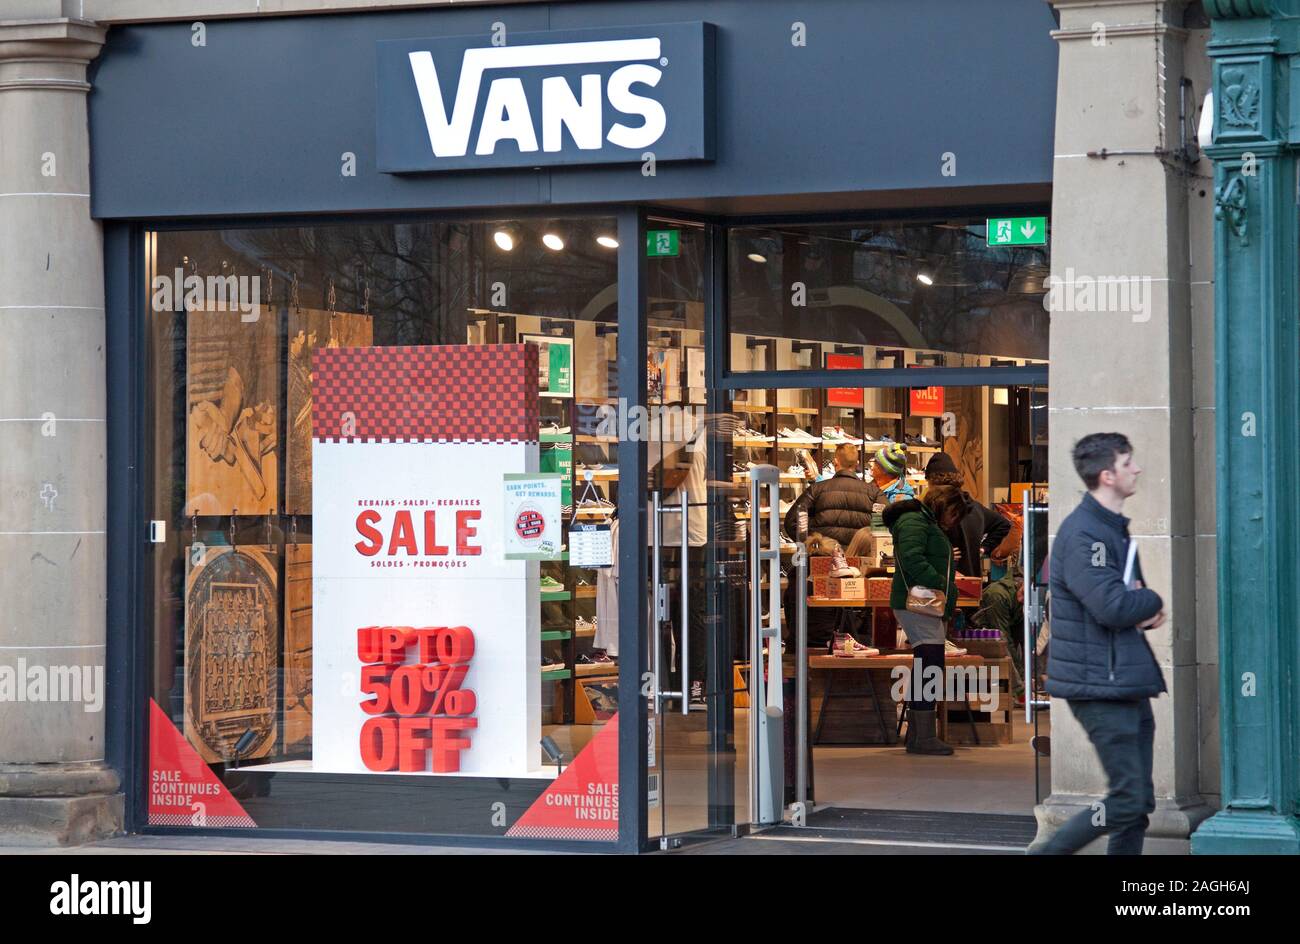 Vans Shop High Resolution Stock Photography Images - Alamy